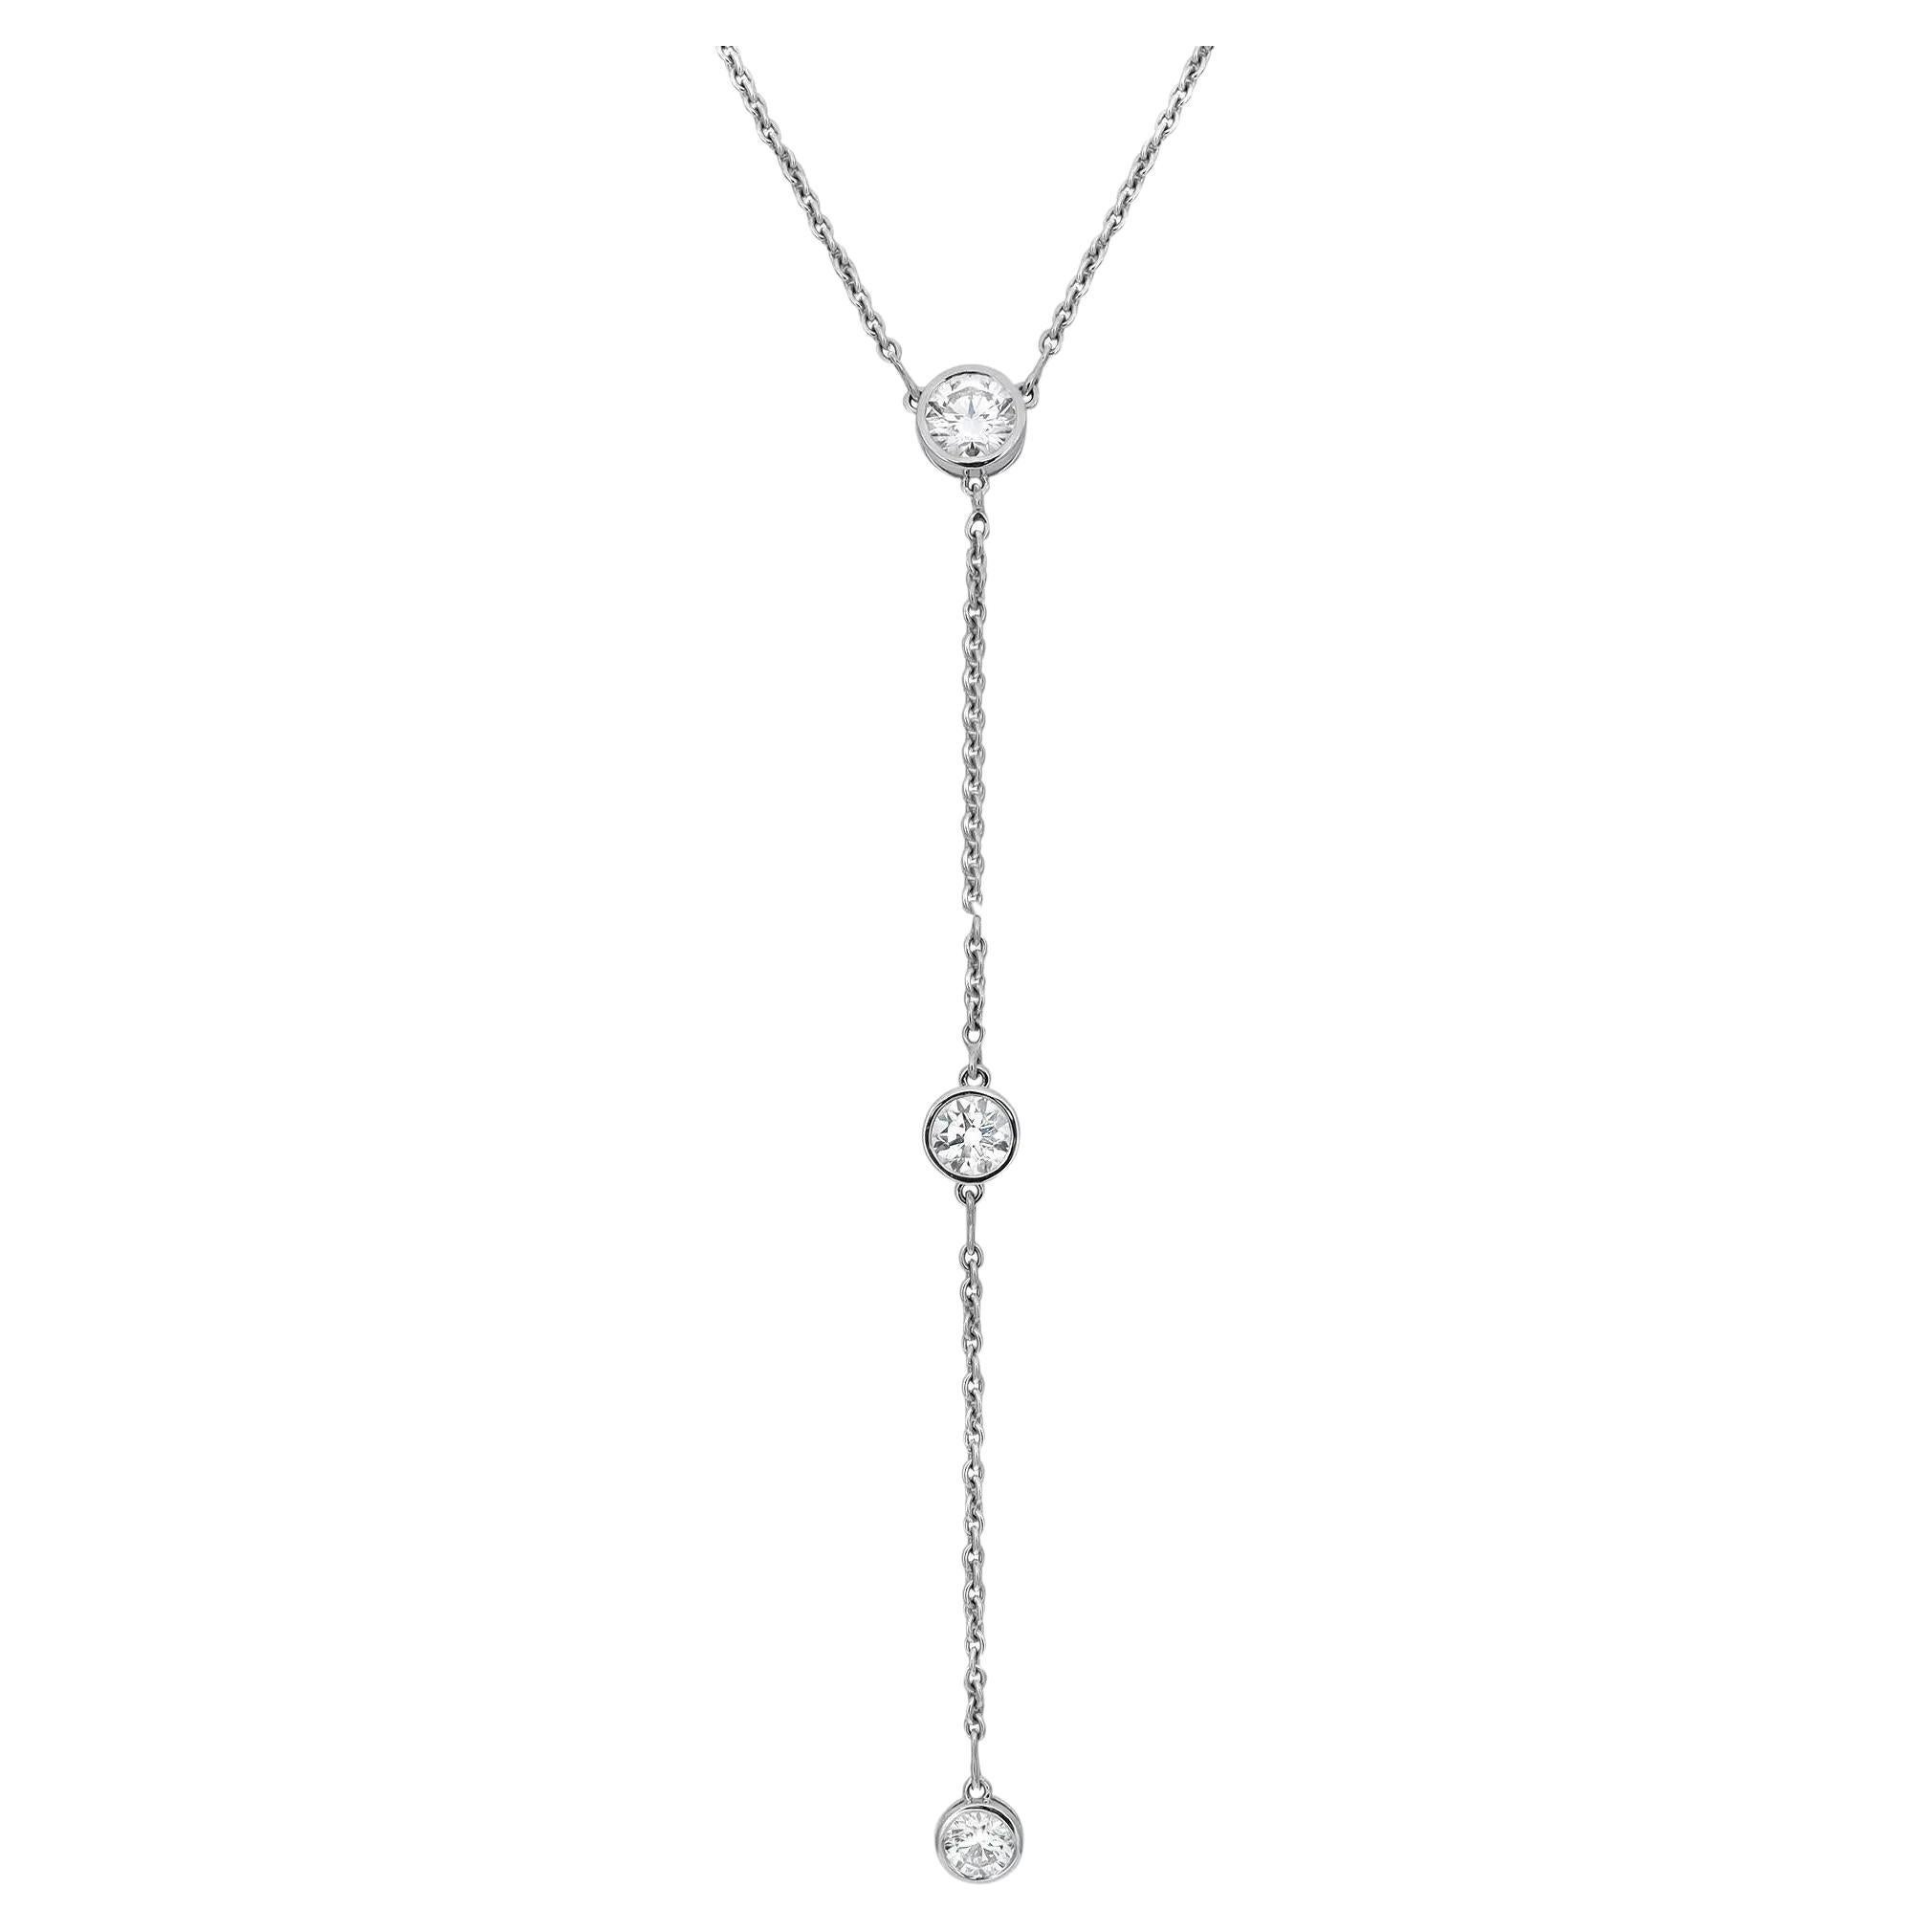 Three Lab Grown Diamond Lariat Necklace 14K White Gold 2.29Cttw 16.5 Inches